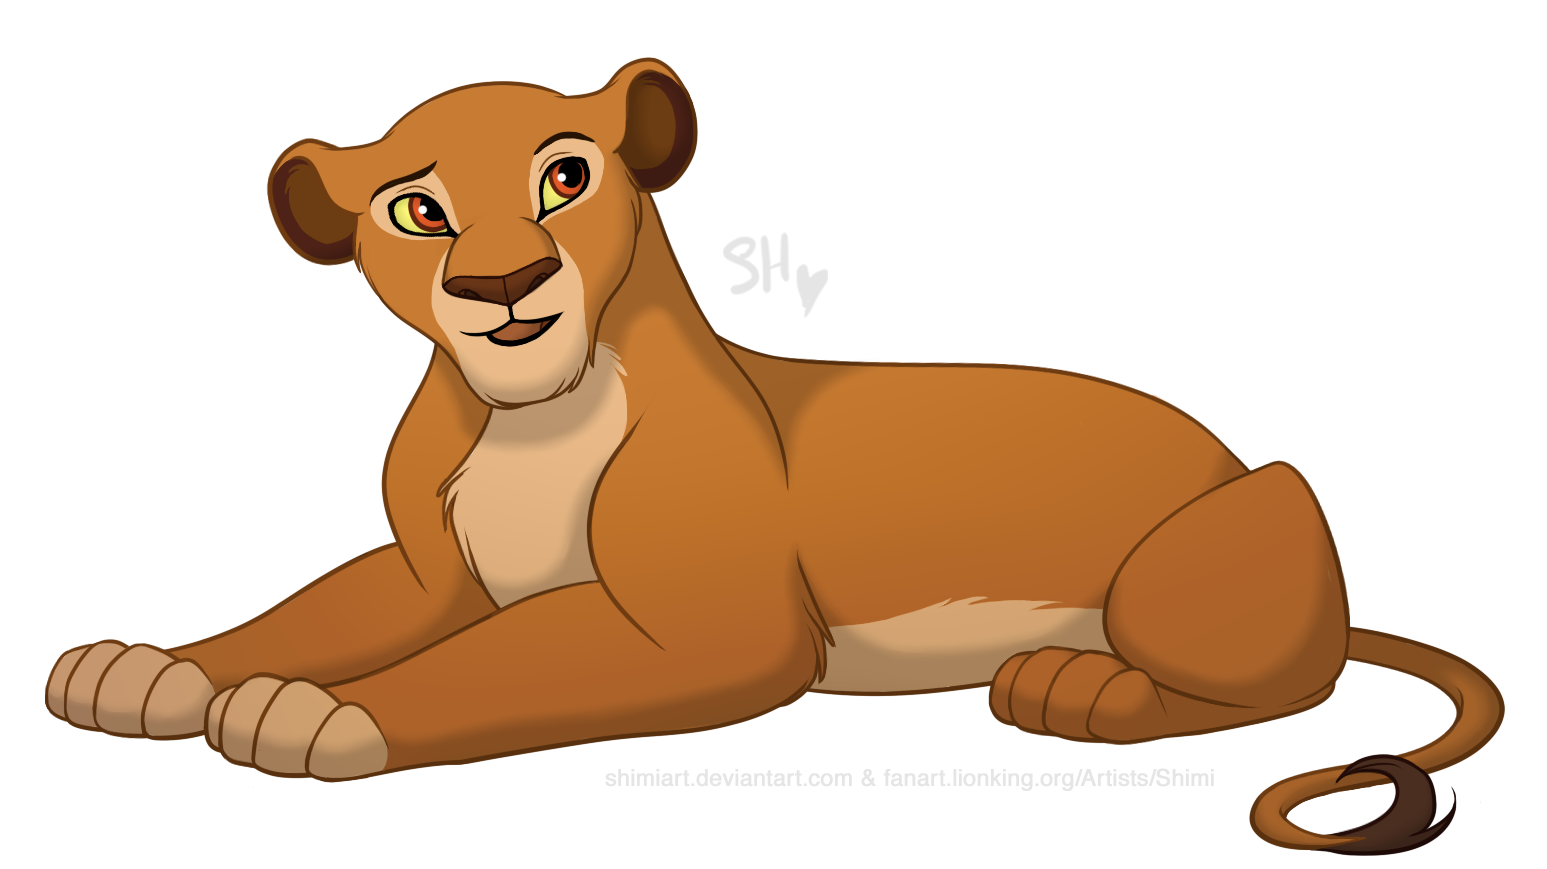 Download PNG image - Lion King PNG Background Isolated Image 